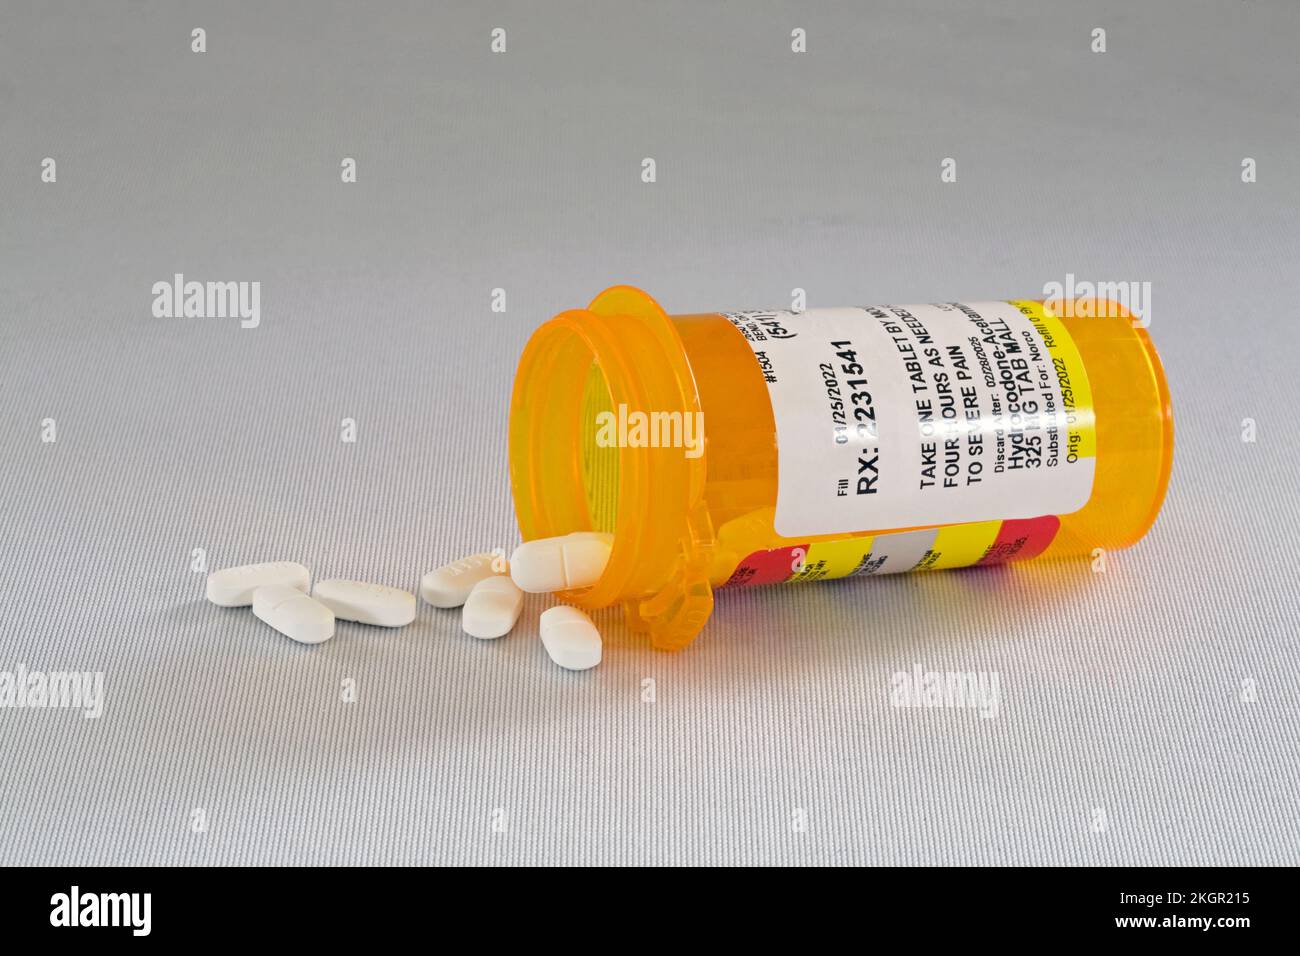 A container of hydrocodine, the addicting opioid pain killer prescribed by many doctors. Many people have become addicted and many others have died fr Stock Photo